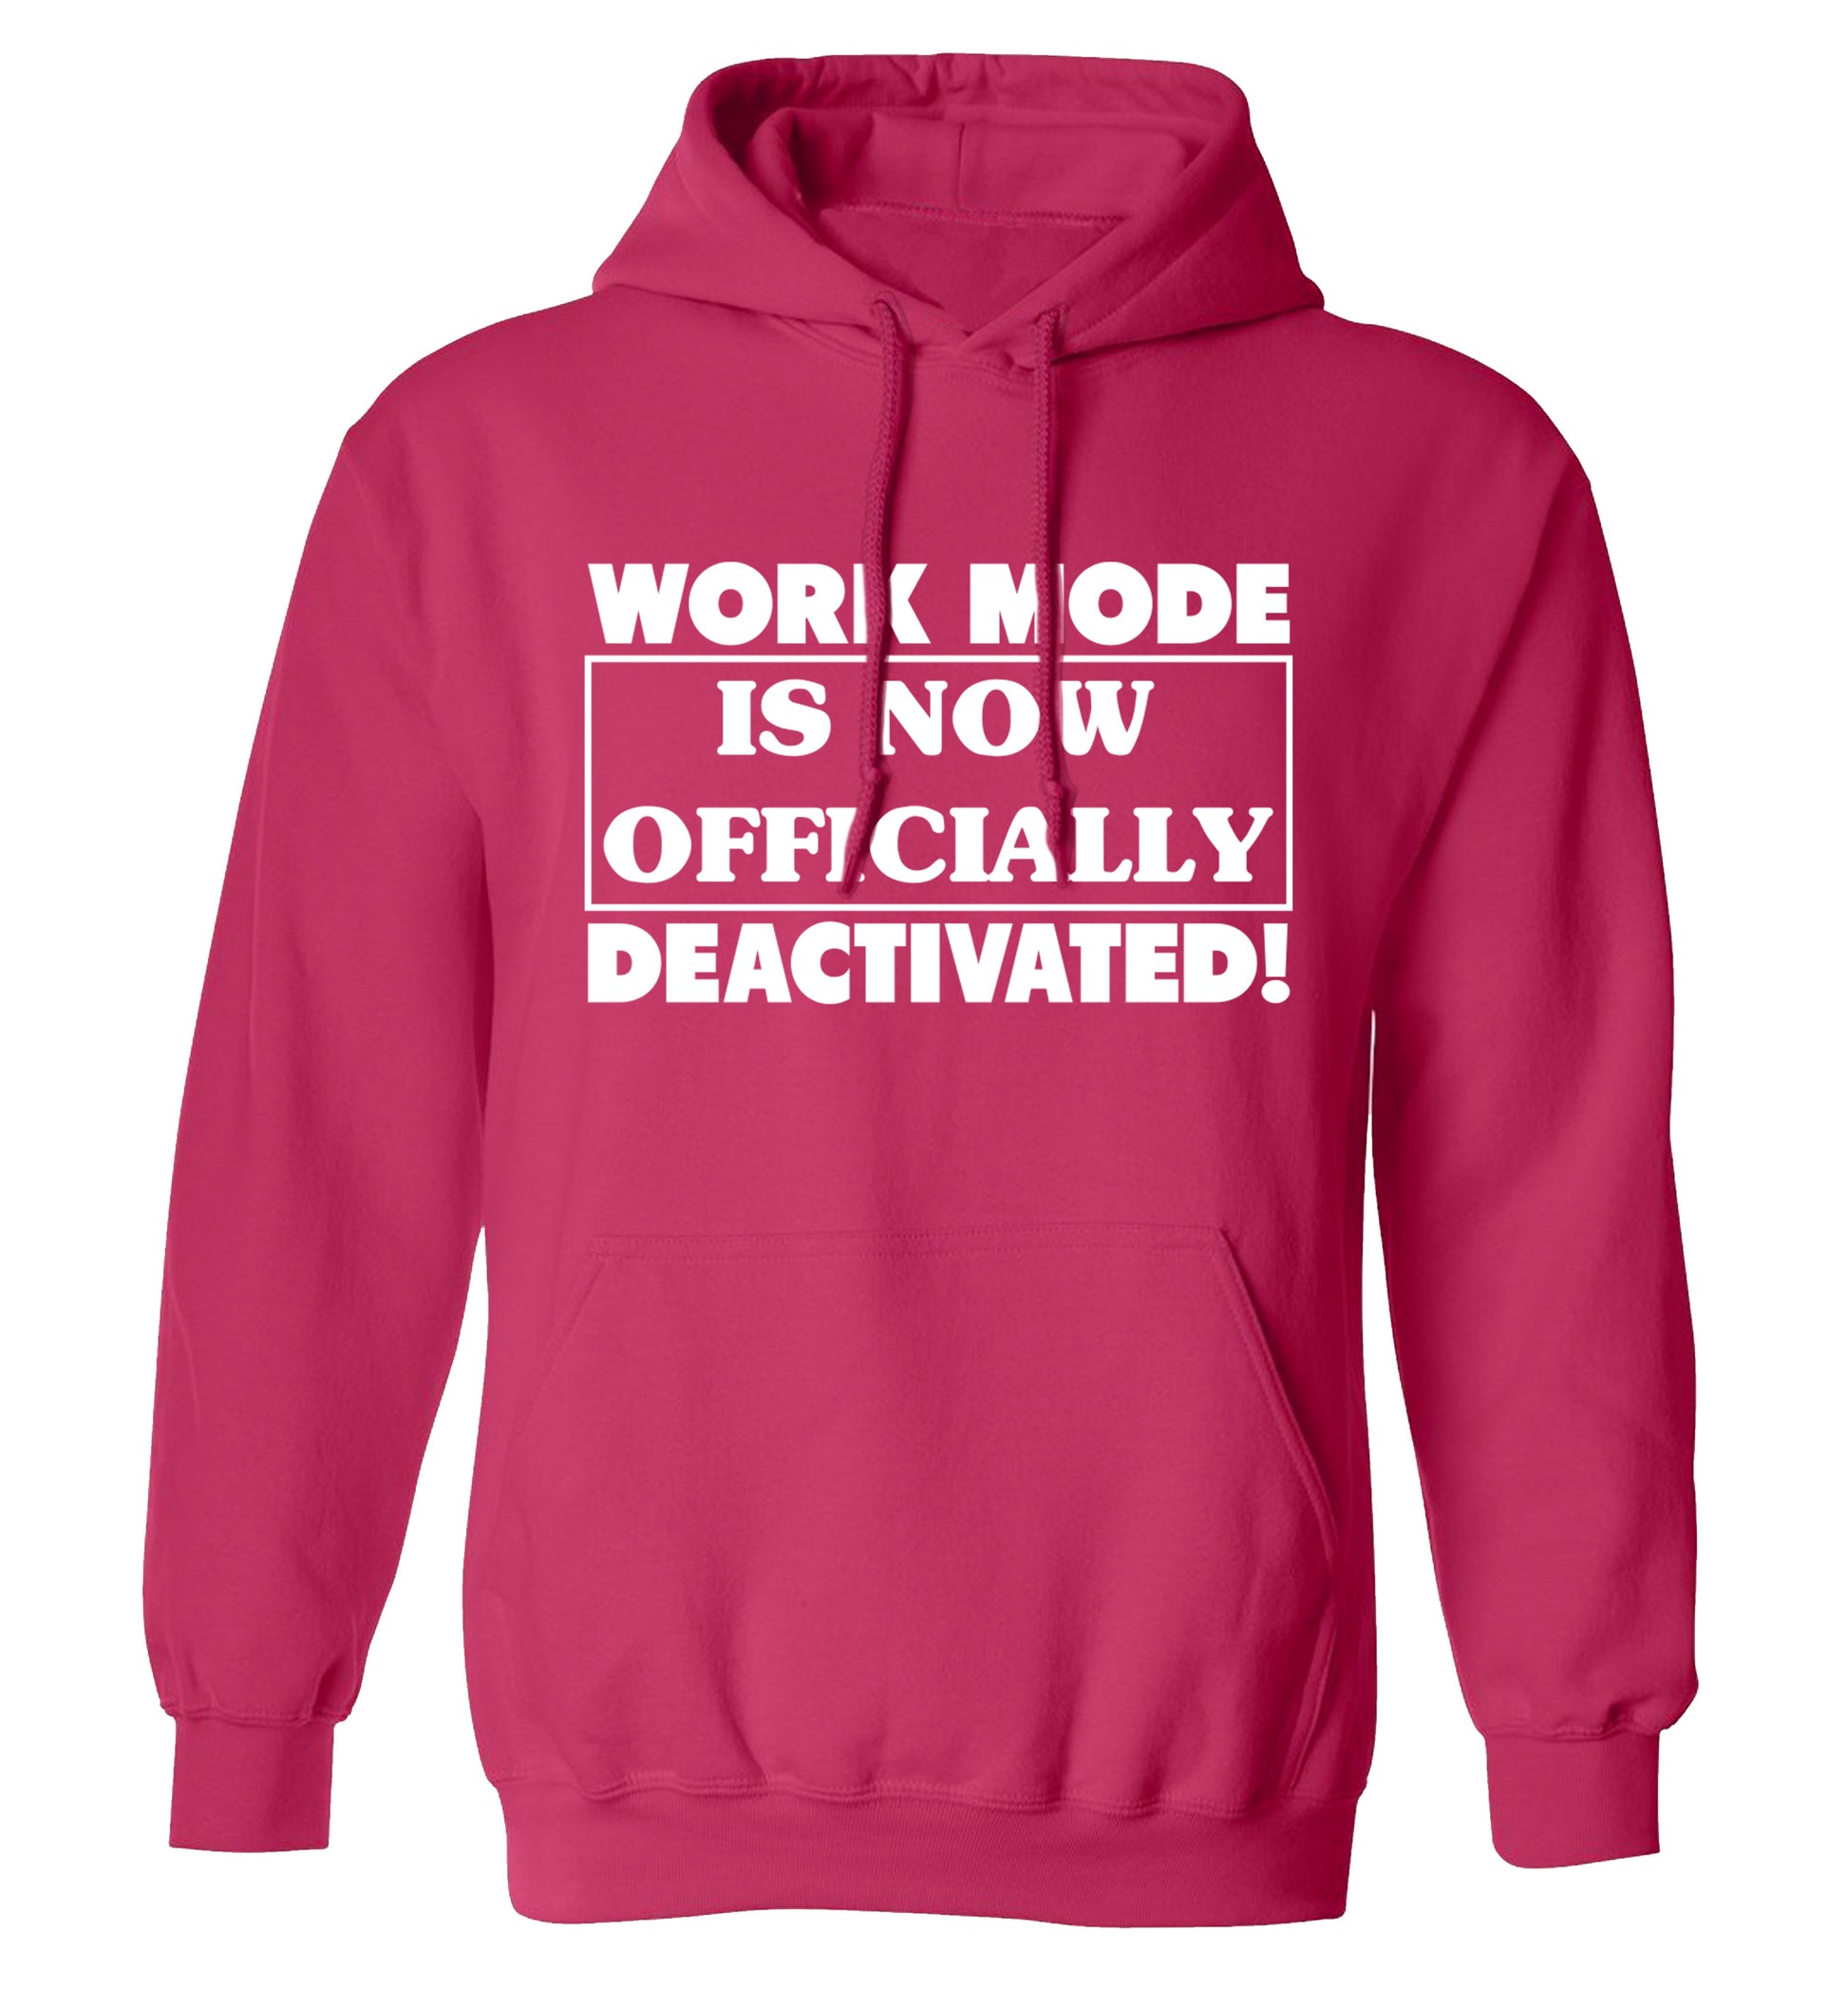 Work mode is now officially deactivated adults unisex pink hoodie 2XL